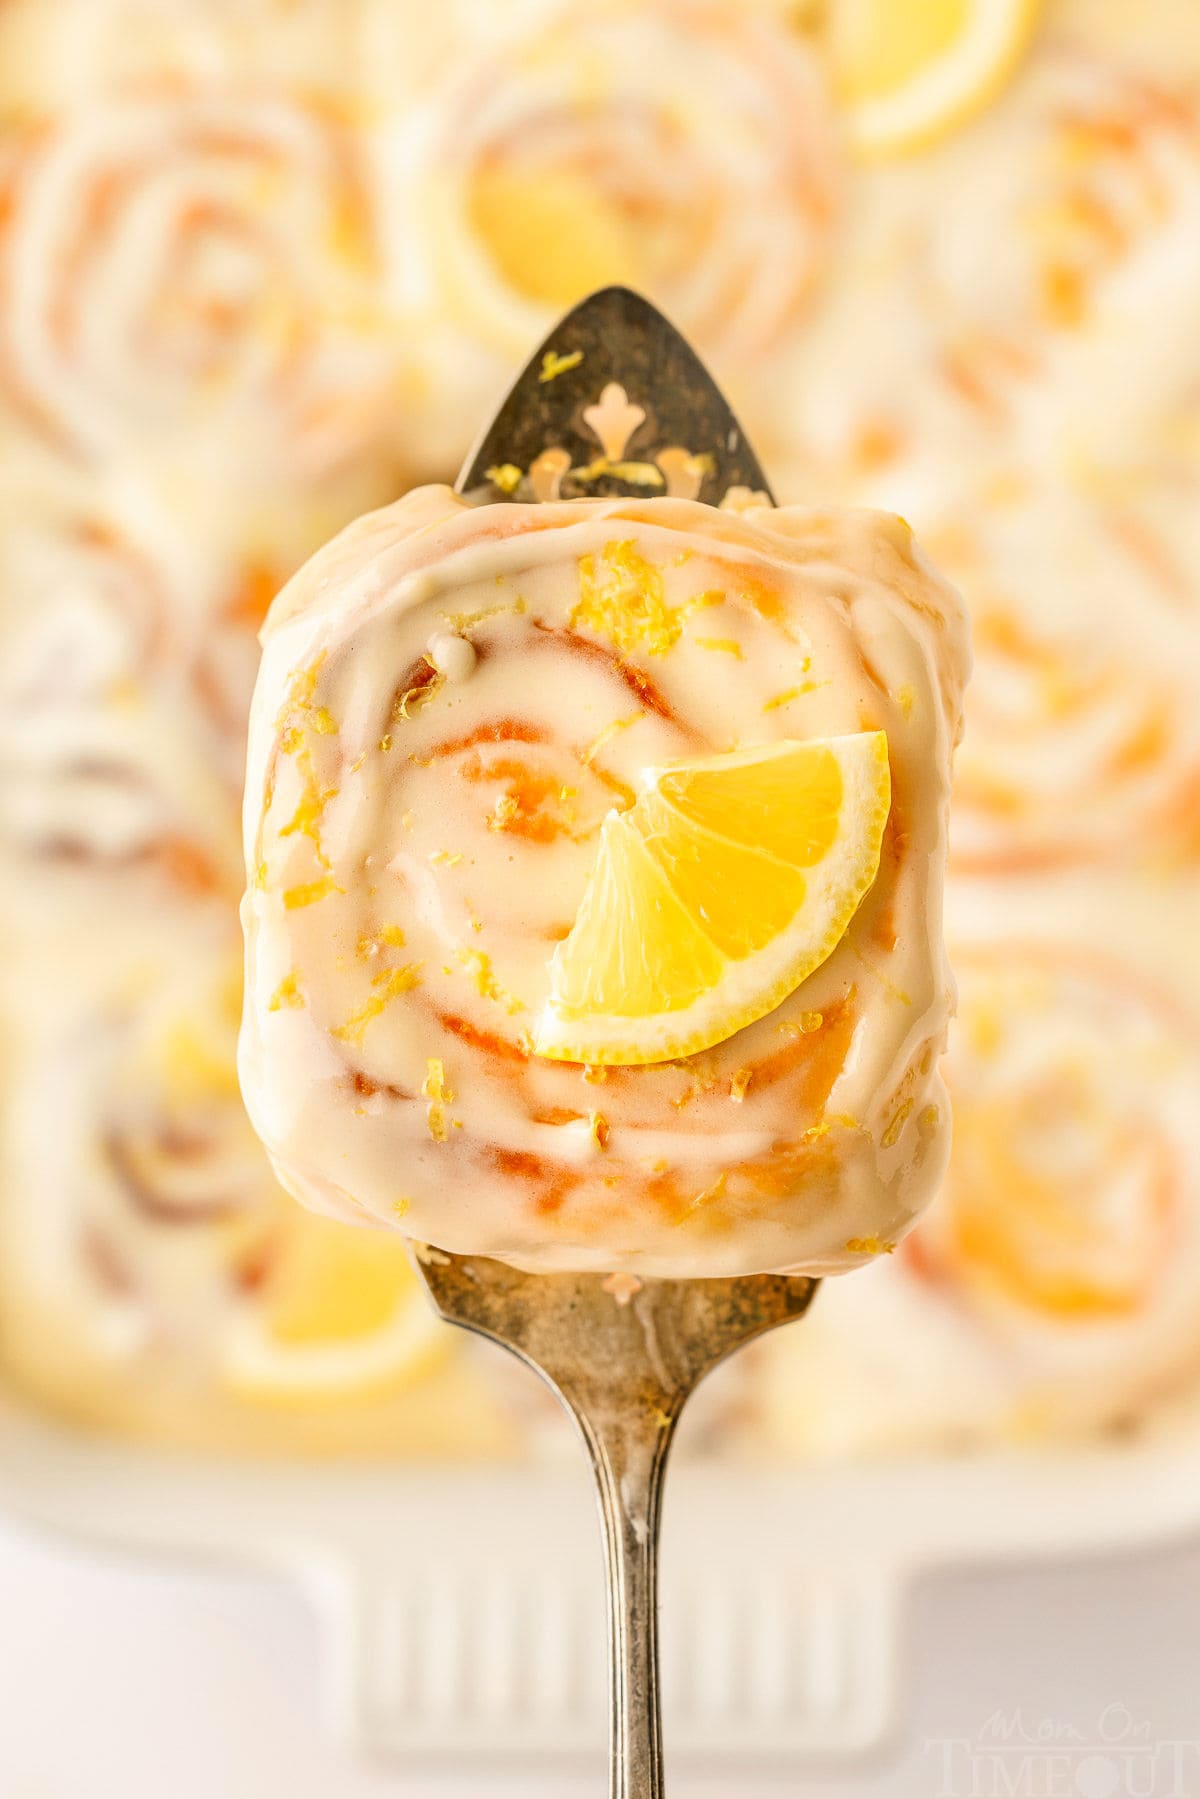 A top-down view of a lemon roll on a spatula, held over the pan of lemon rolls.